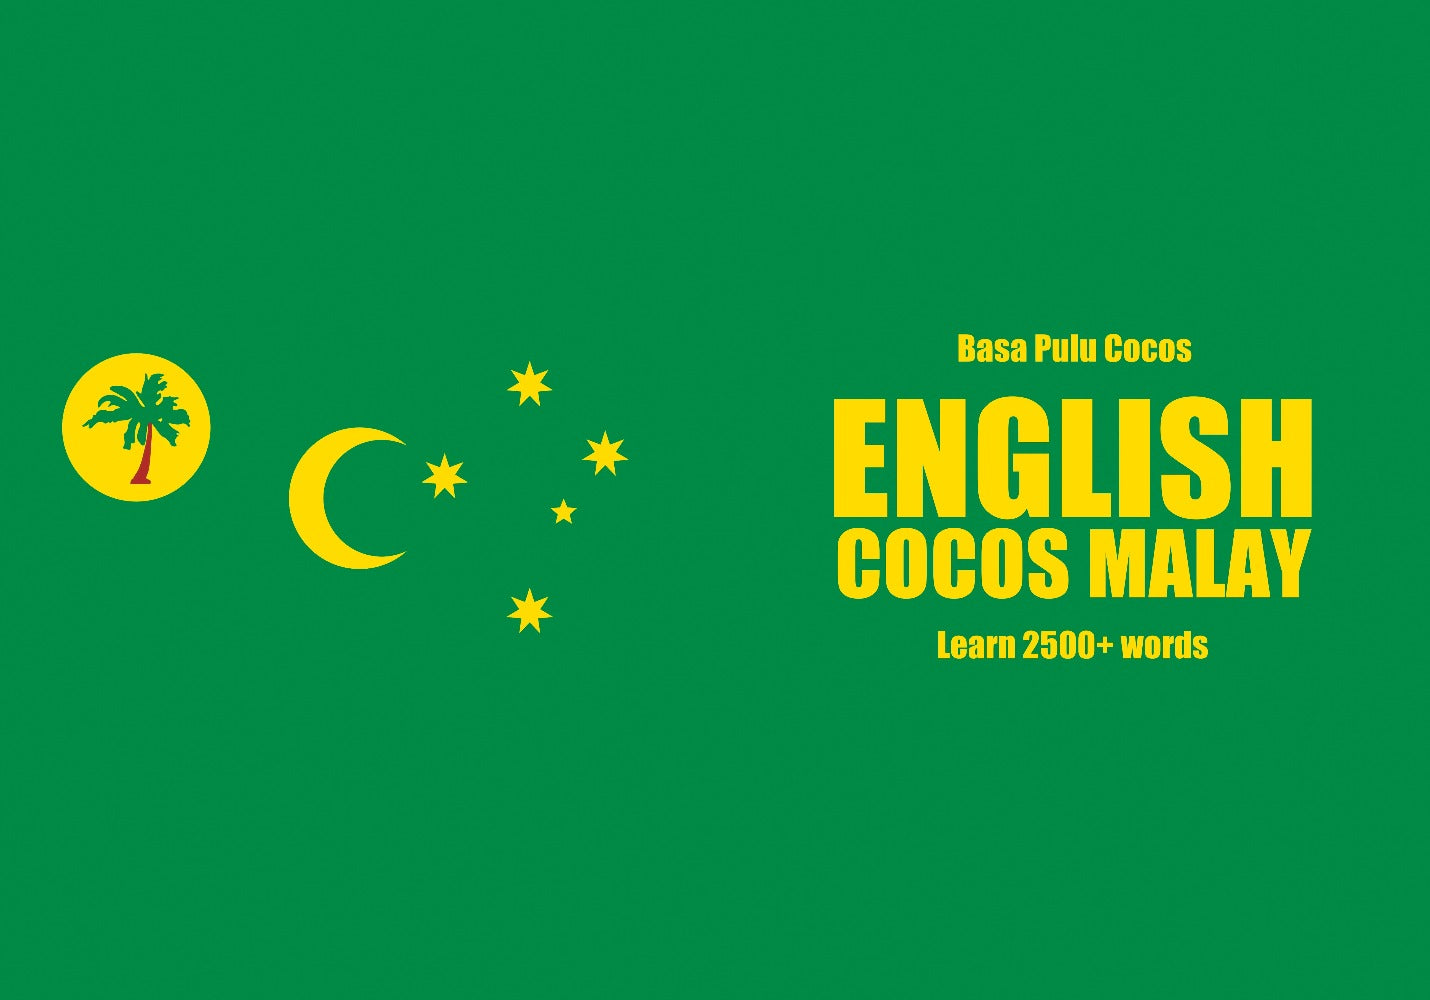 Cocos Malay language learning notebook cover